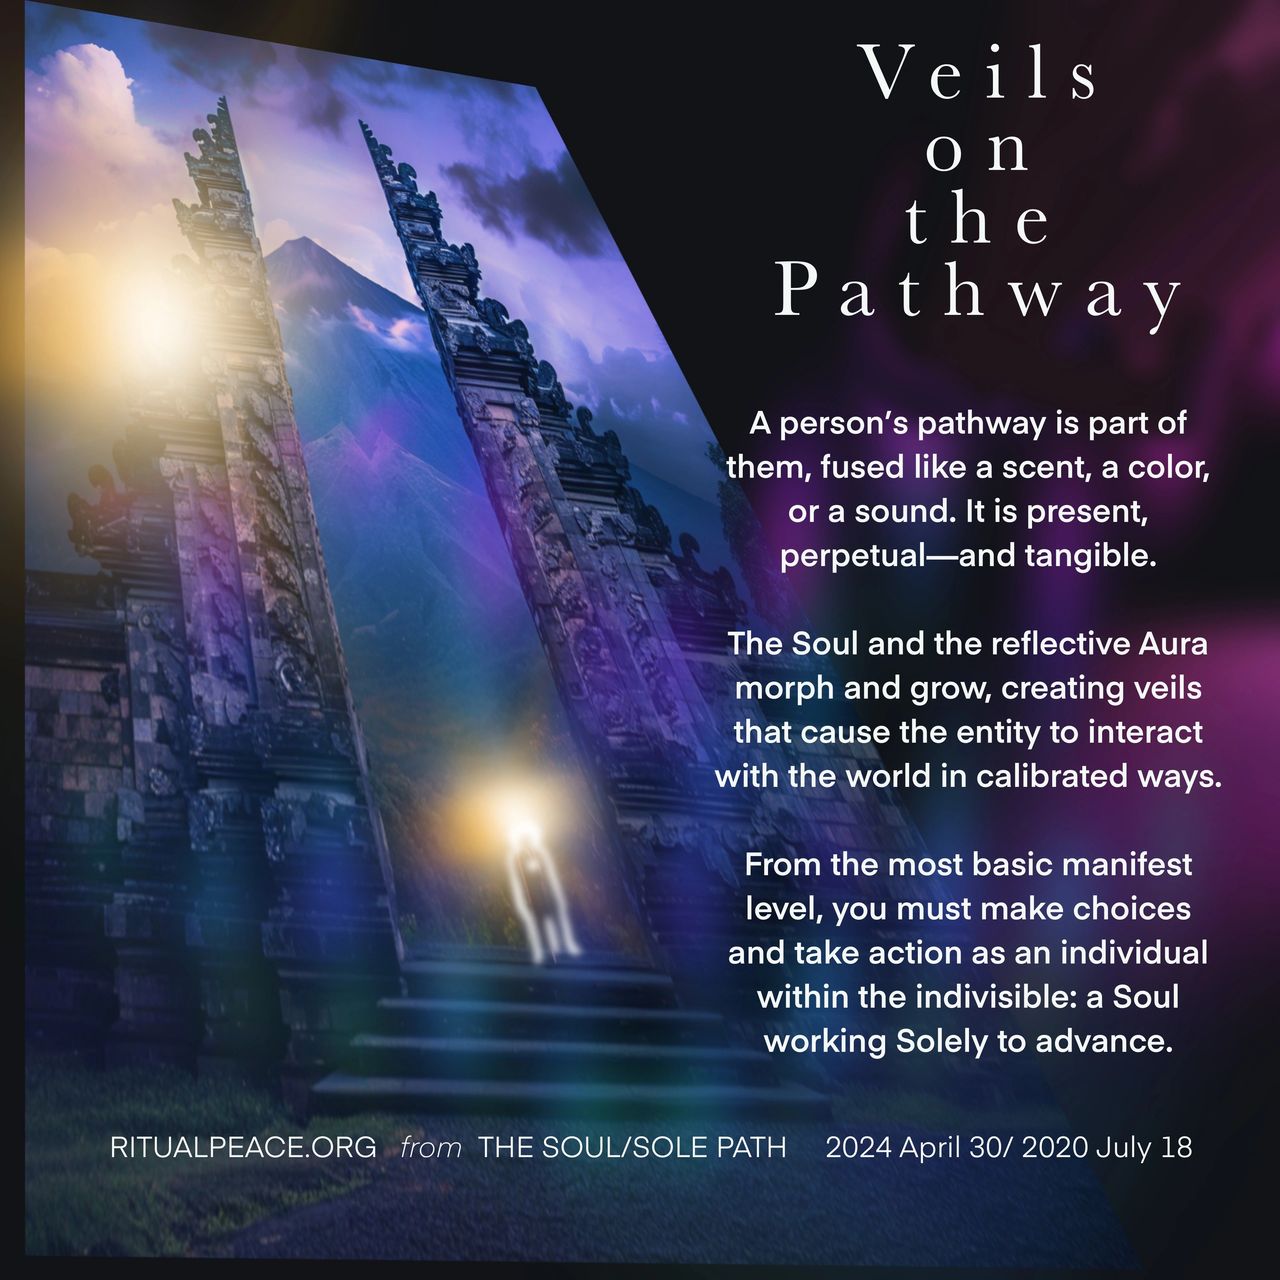 VEILS ON THE PATHWAY, SOUL WORKS SOLELY TO ADVANCE, EYE OF THE NEEDLE, CHALLENGE